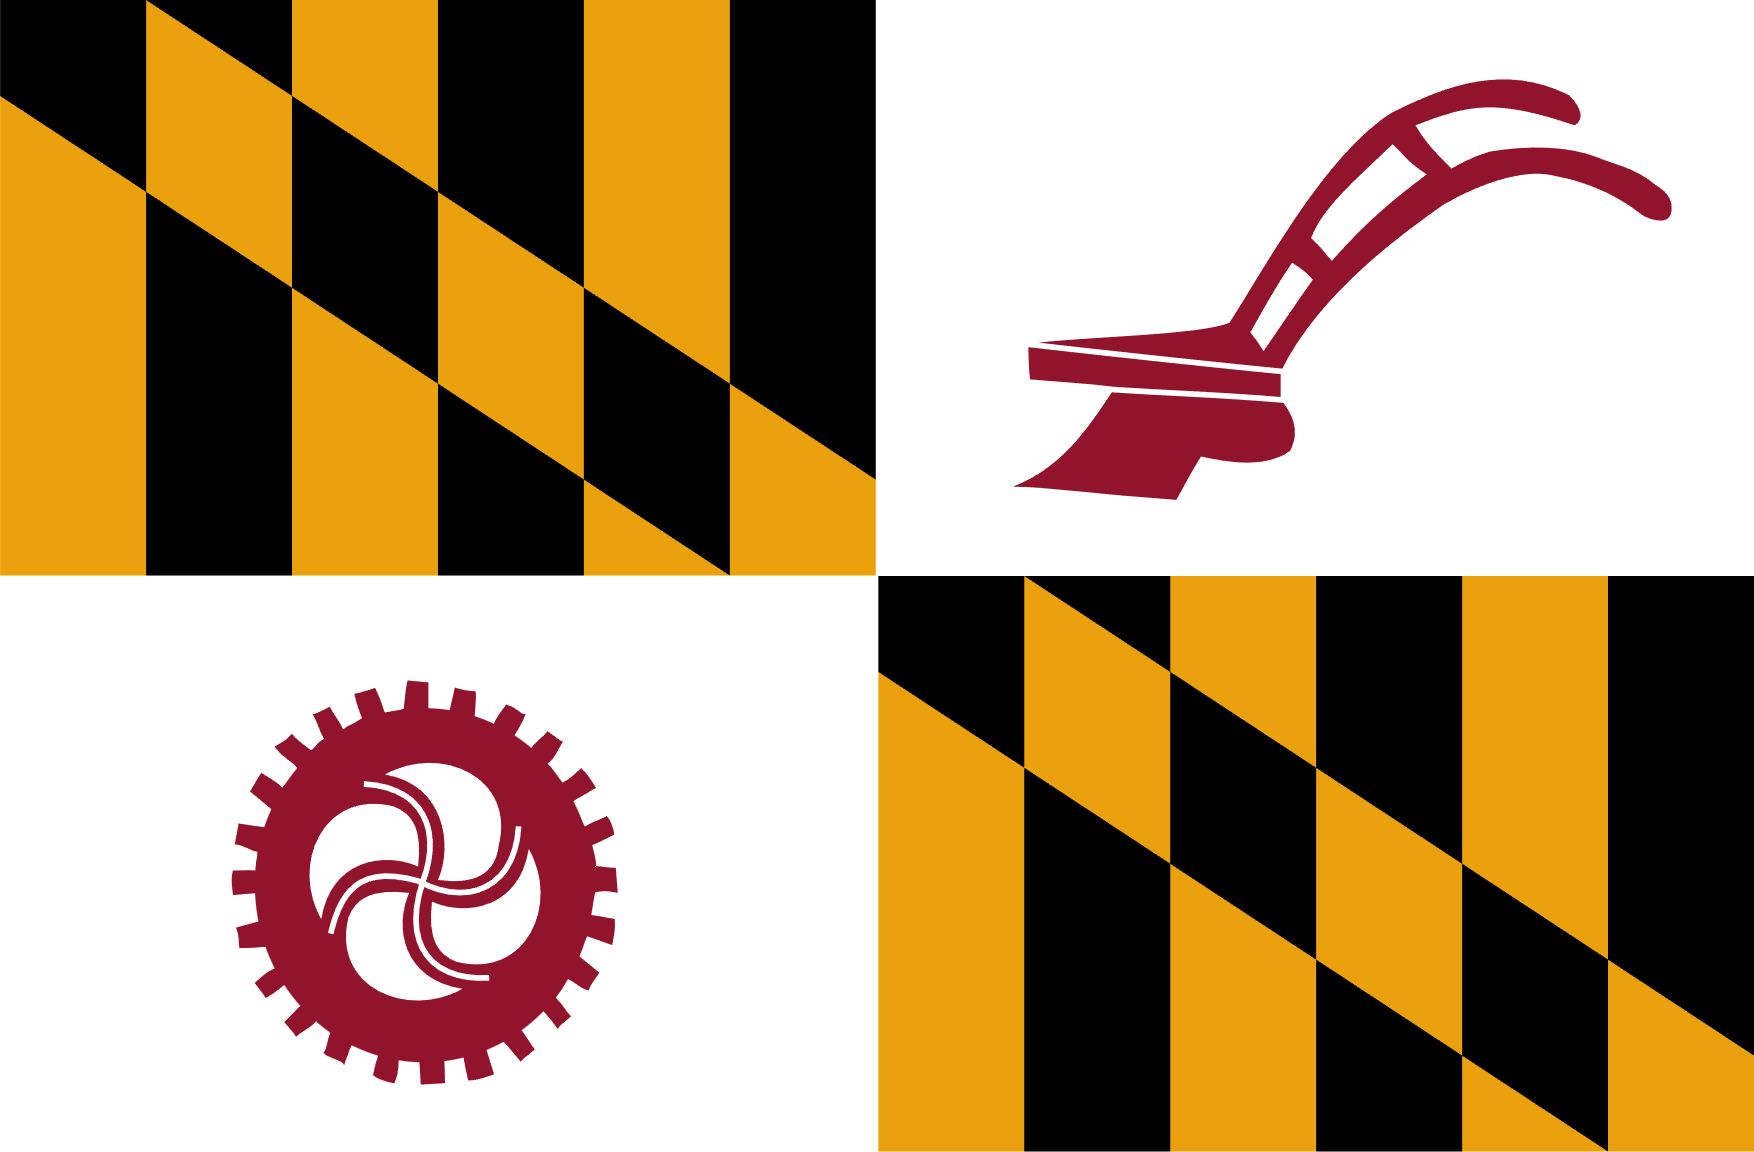 FLAGS ACROSS MARYLAND: BALTIMORE COUNTY